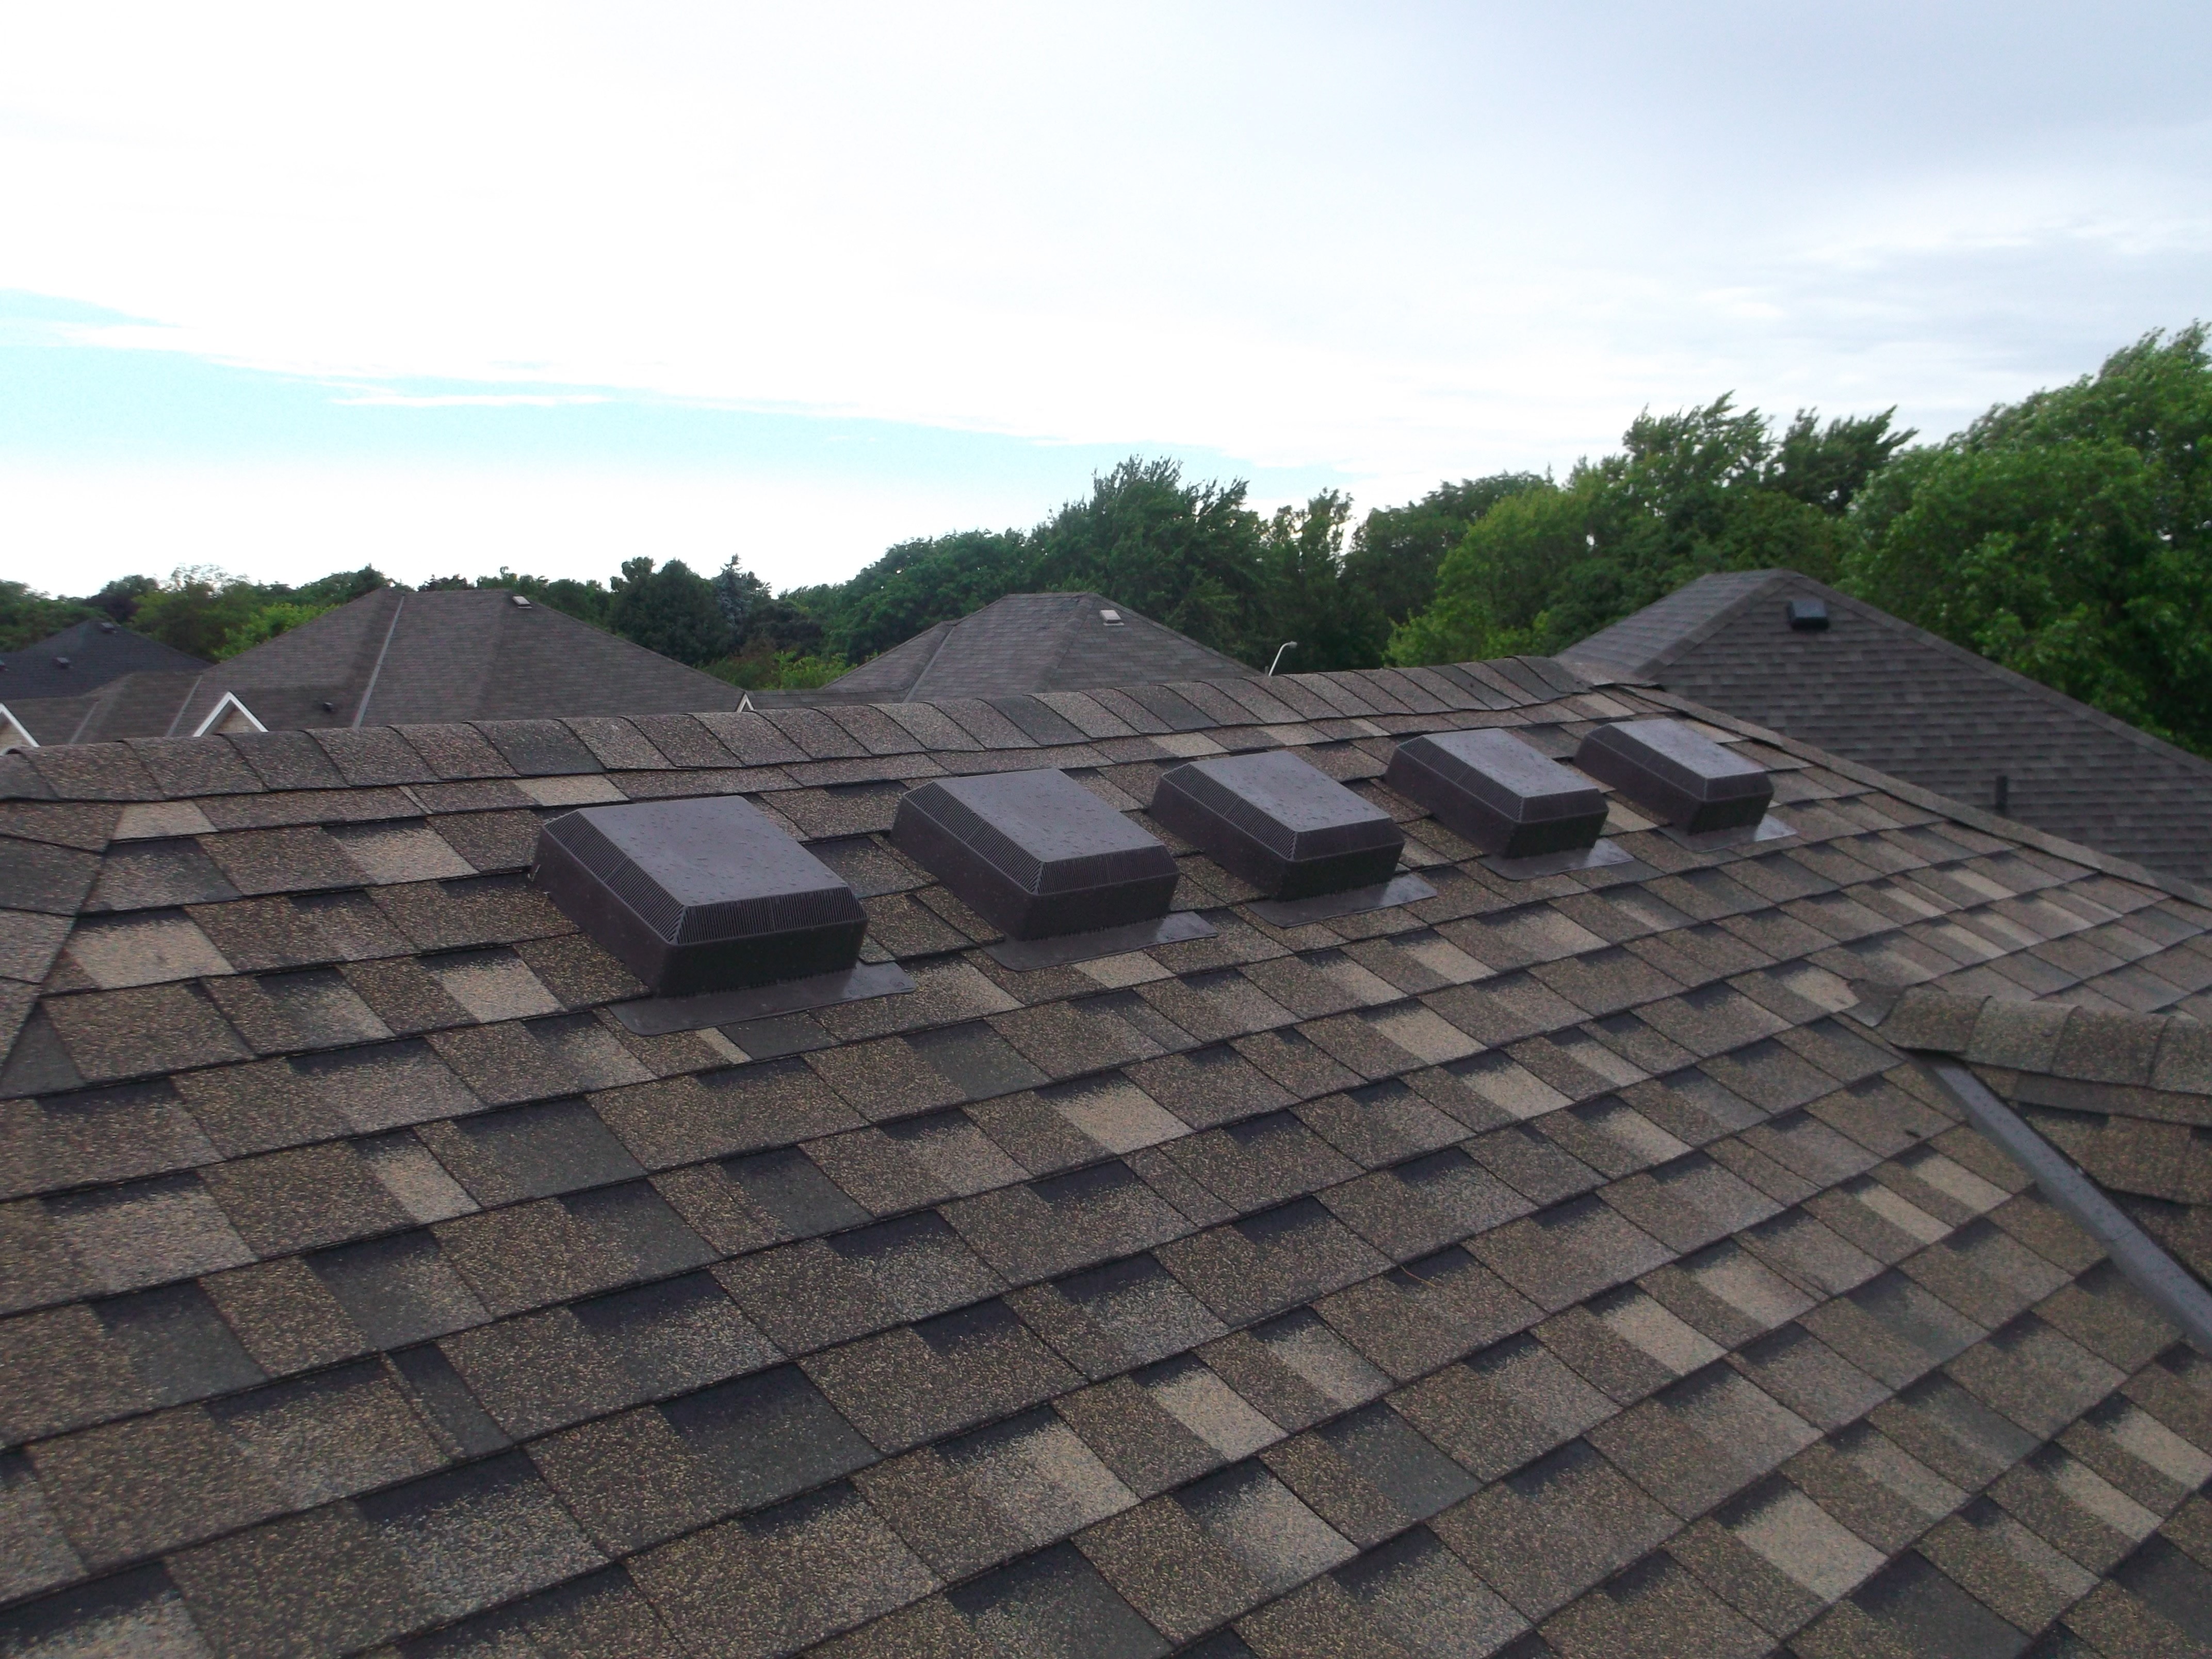 New roof view